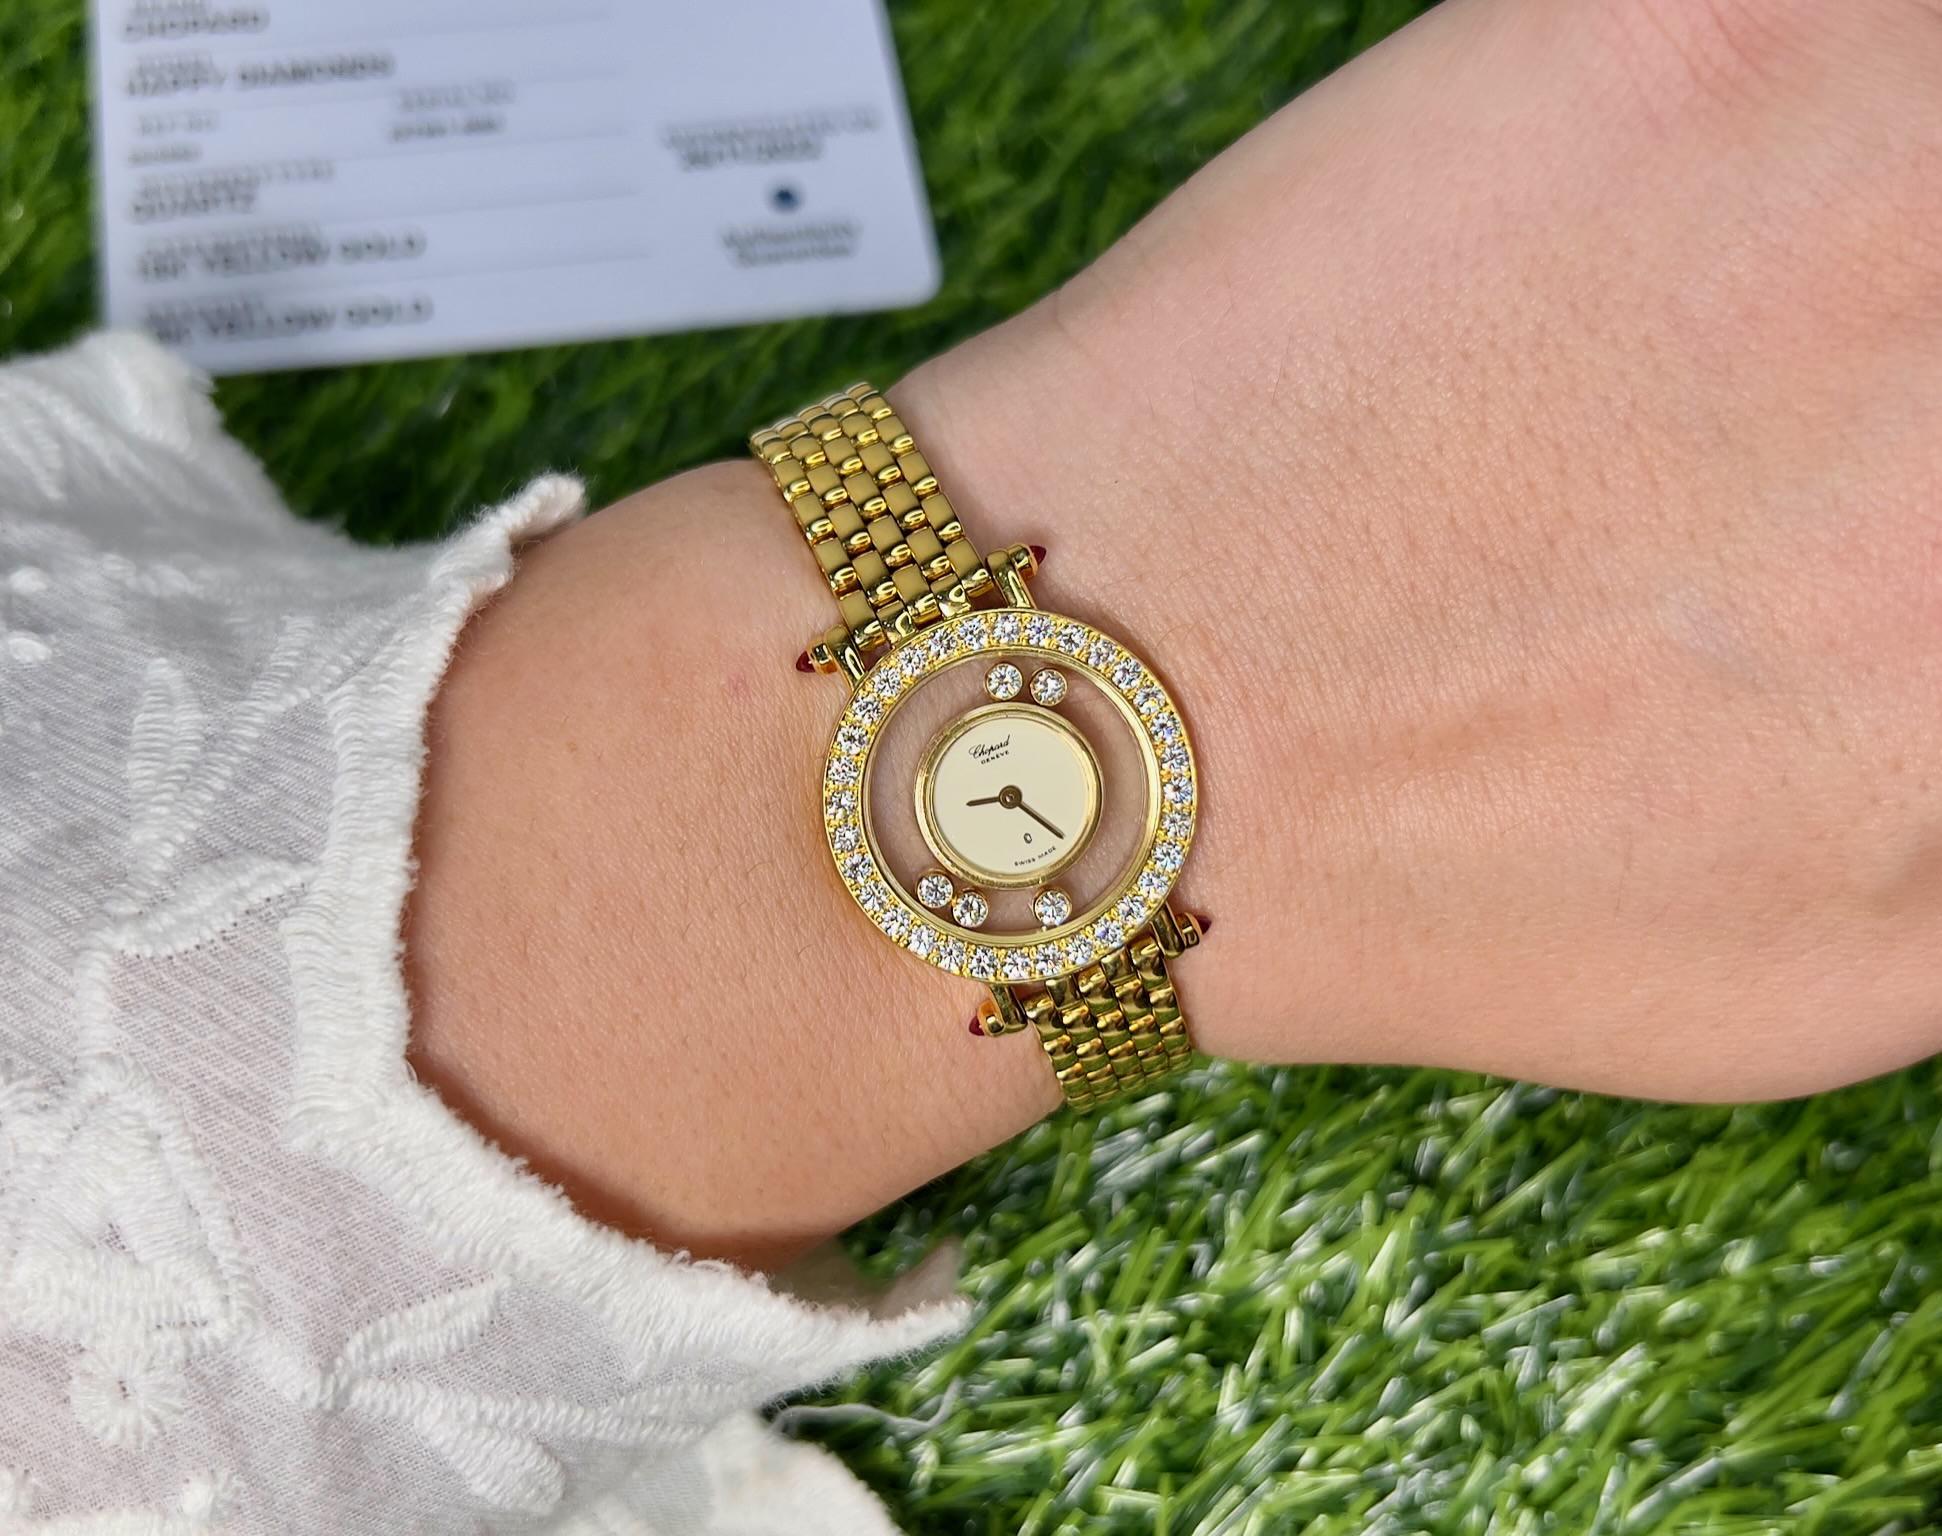 Brand: Chopard
Collection: Happy Diamonds
Model: 20/5060
It comes with the Original Box & Authenticity Card
Metal: 18K Yellow Gold
Band Length: 6.5 inches